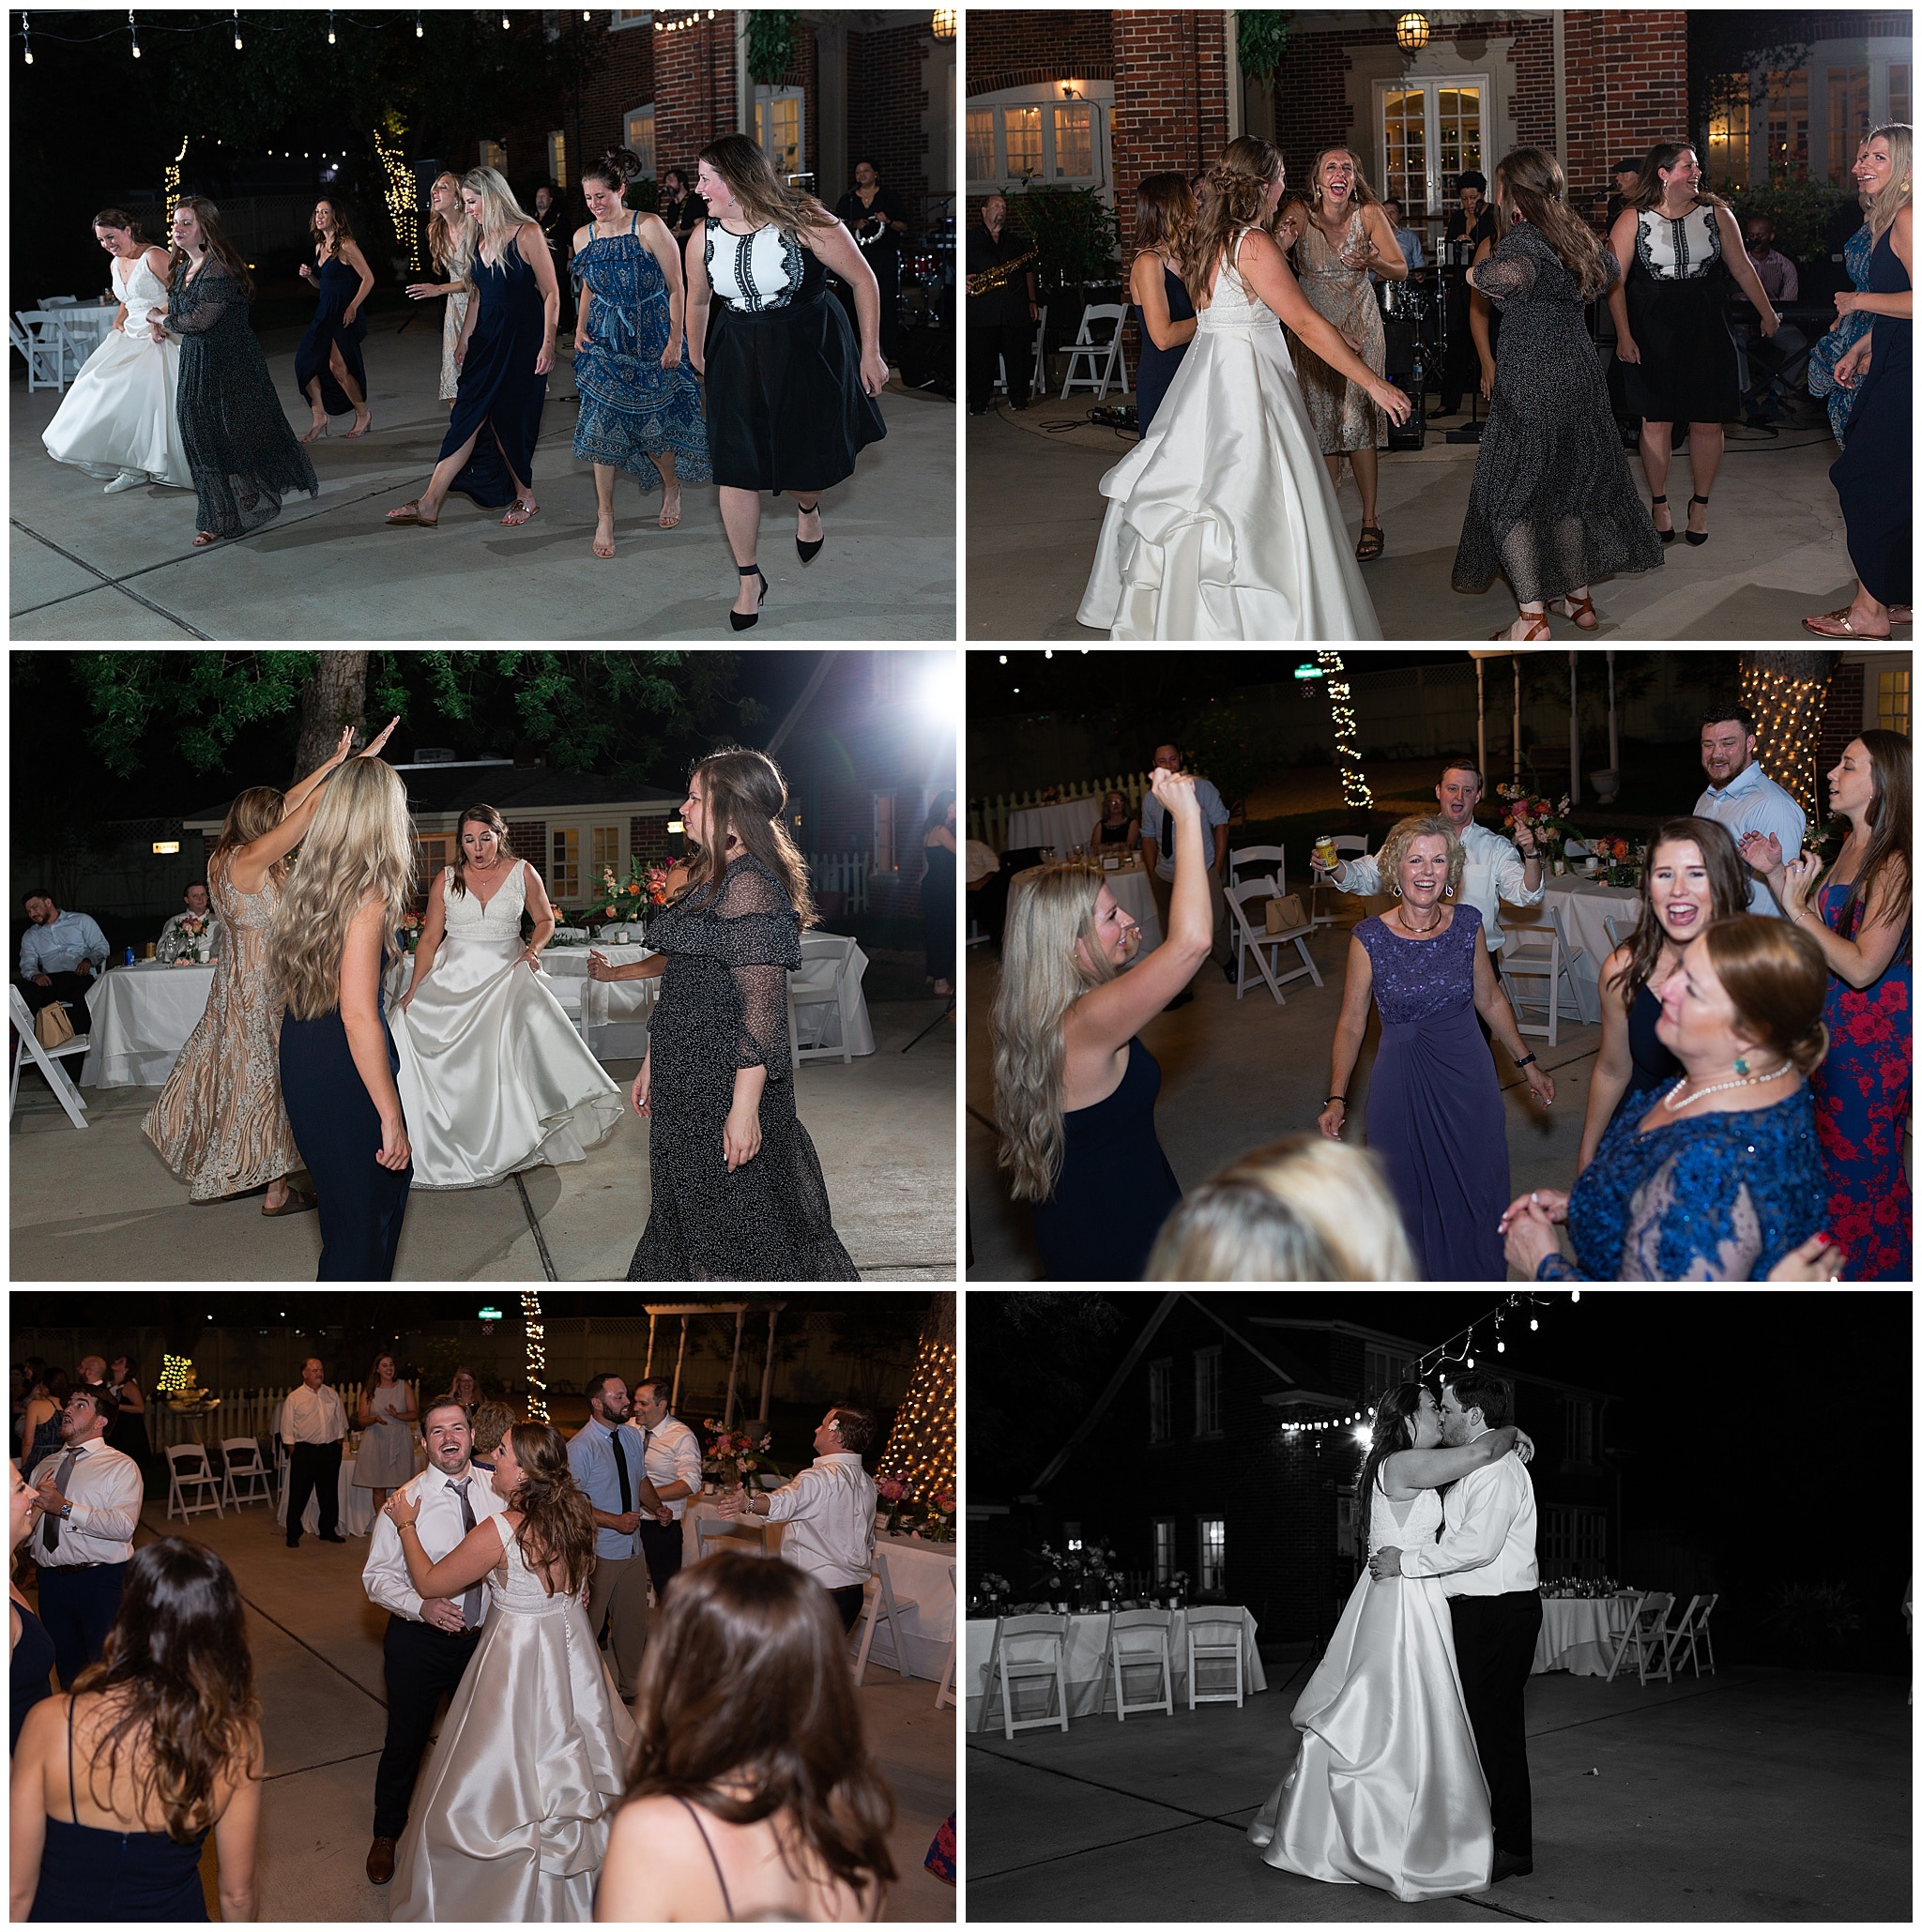 wedding reception dancing at Astin Mansion in Bryan Texas by Swish and Click Photography